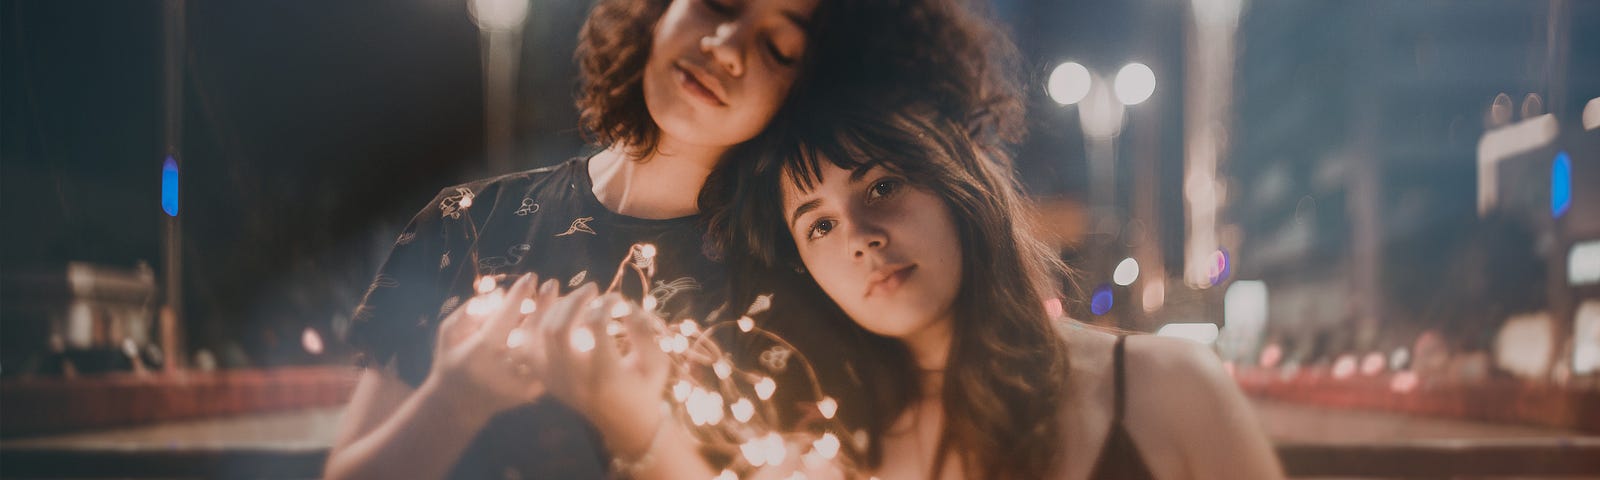 Two young women leaning against each other with a string of fairy lights between them